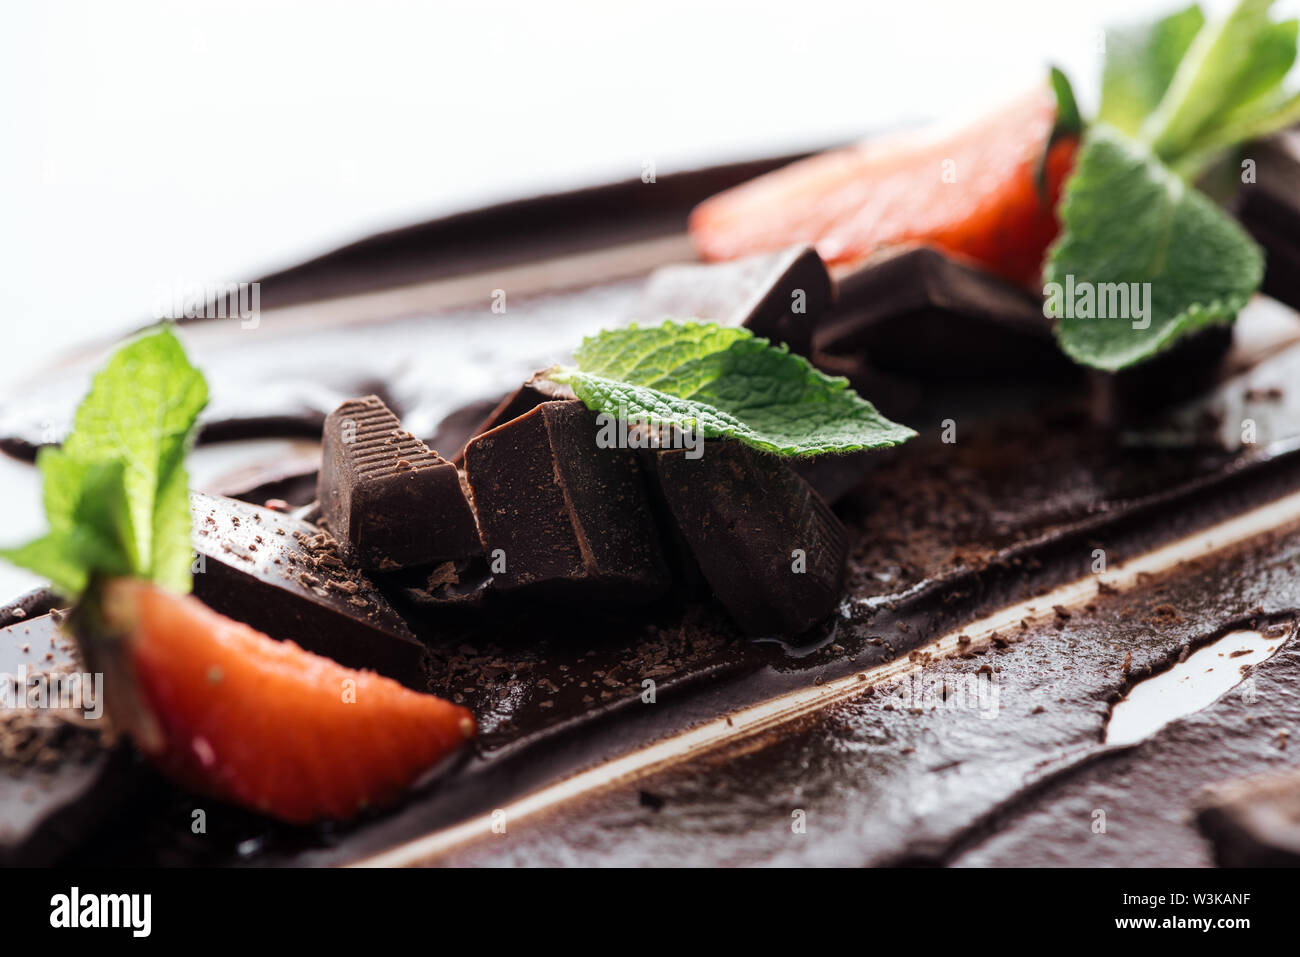 Close up view of pieces of chocolate bar, strawberries and fresh mint Stock Photo